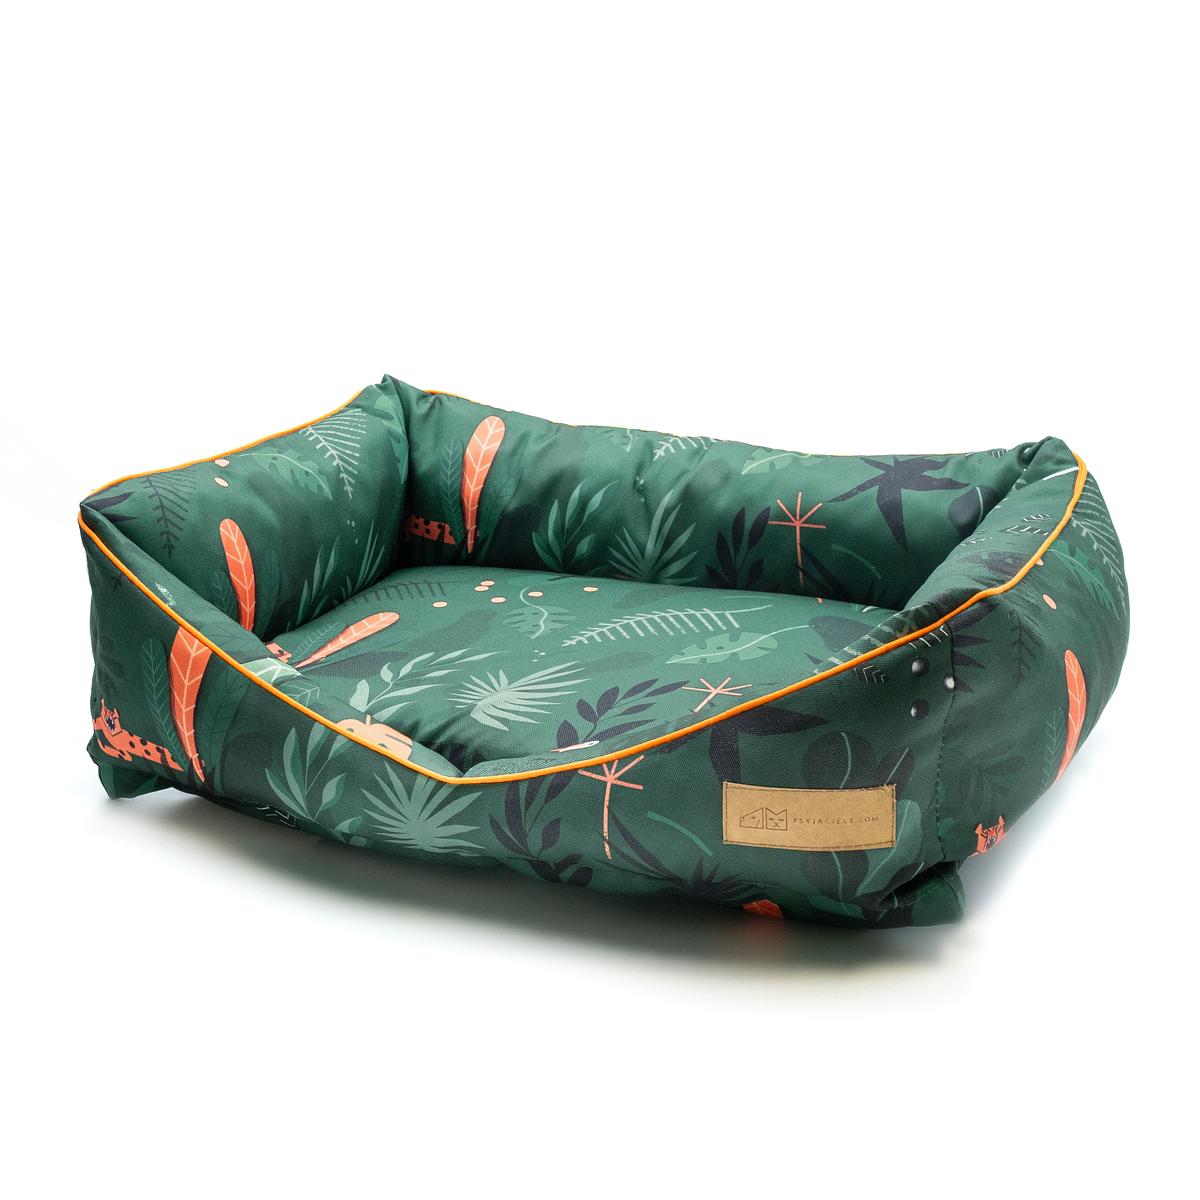 Orthopedic couch "Welcome to the jungle"